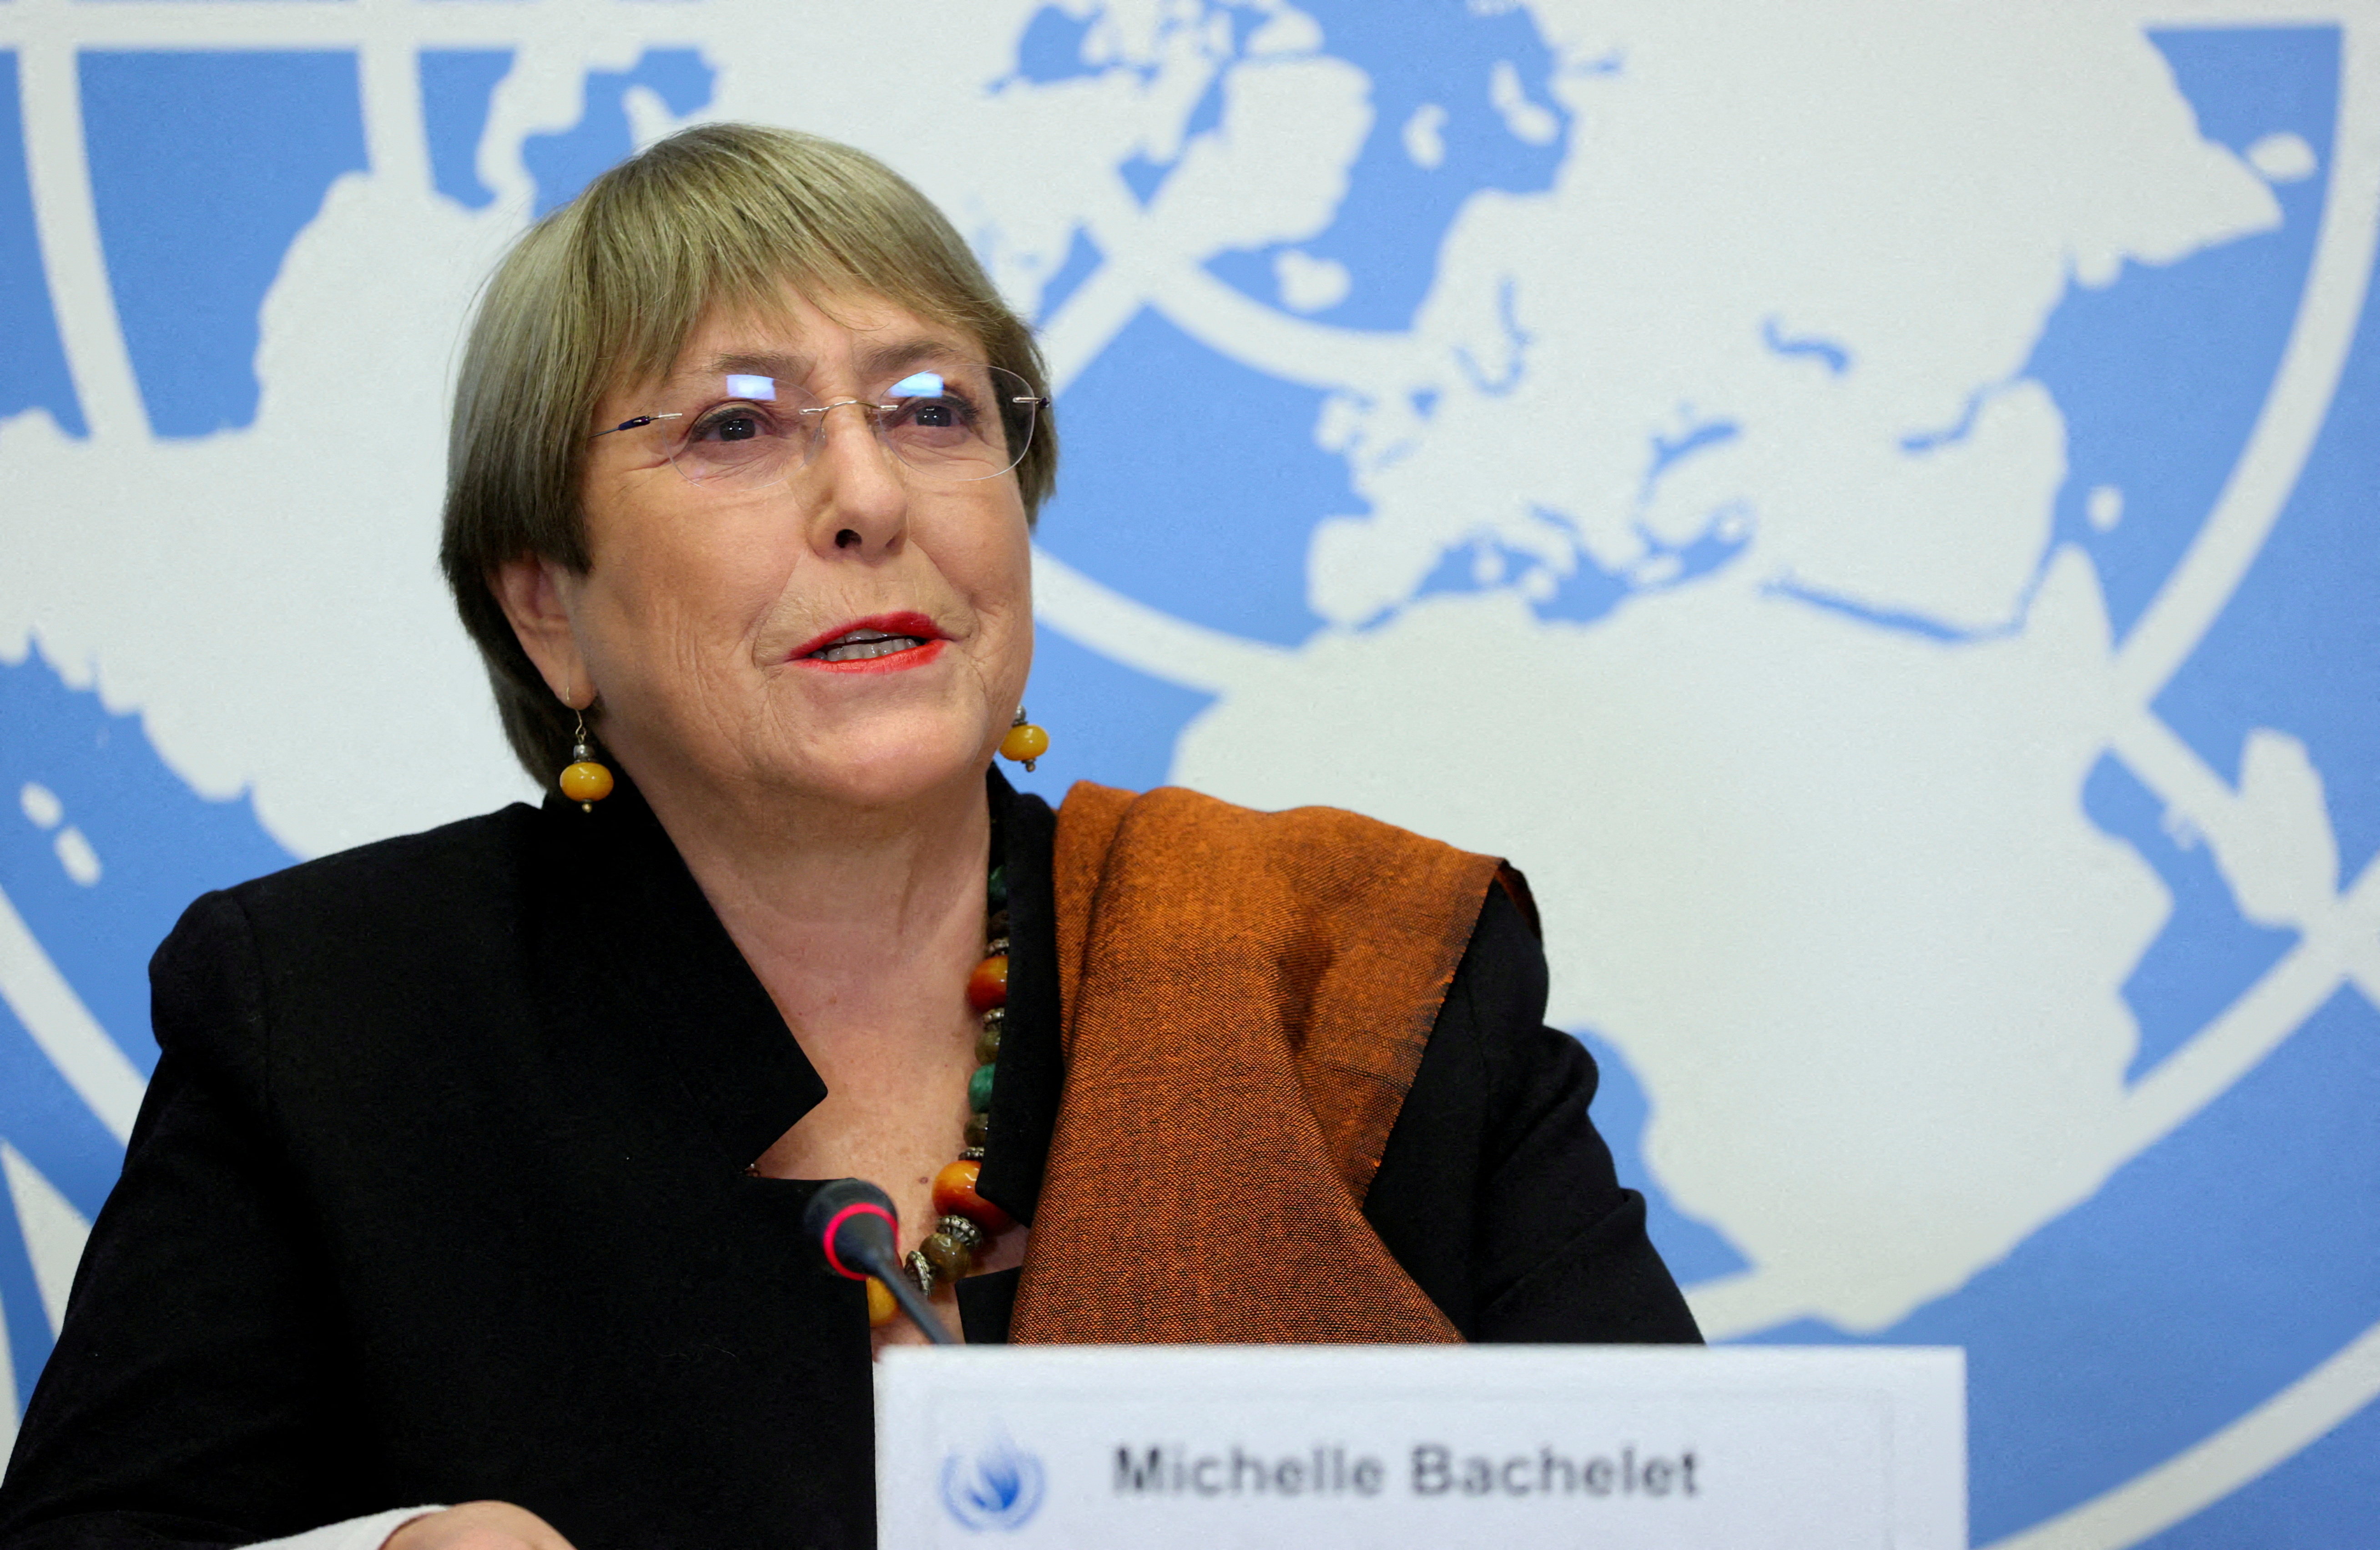 Michelle Bachelet, U.N. rights chief, says no to second term amid